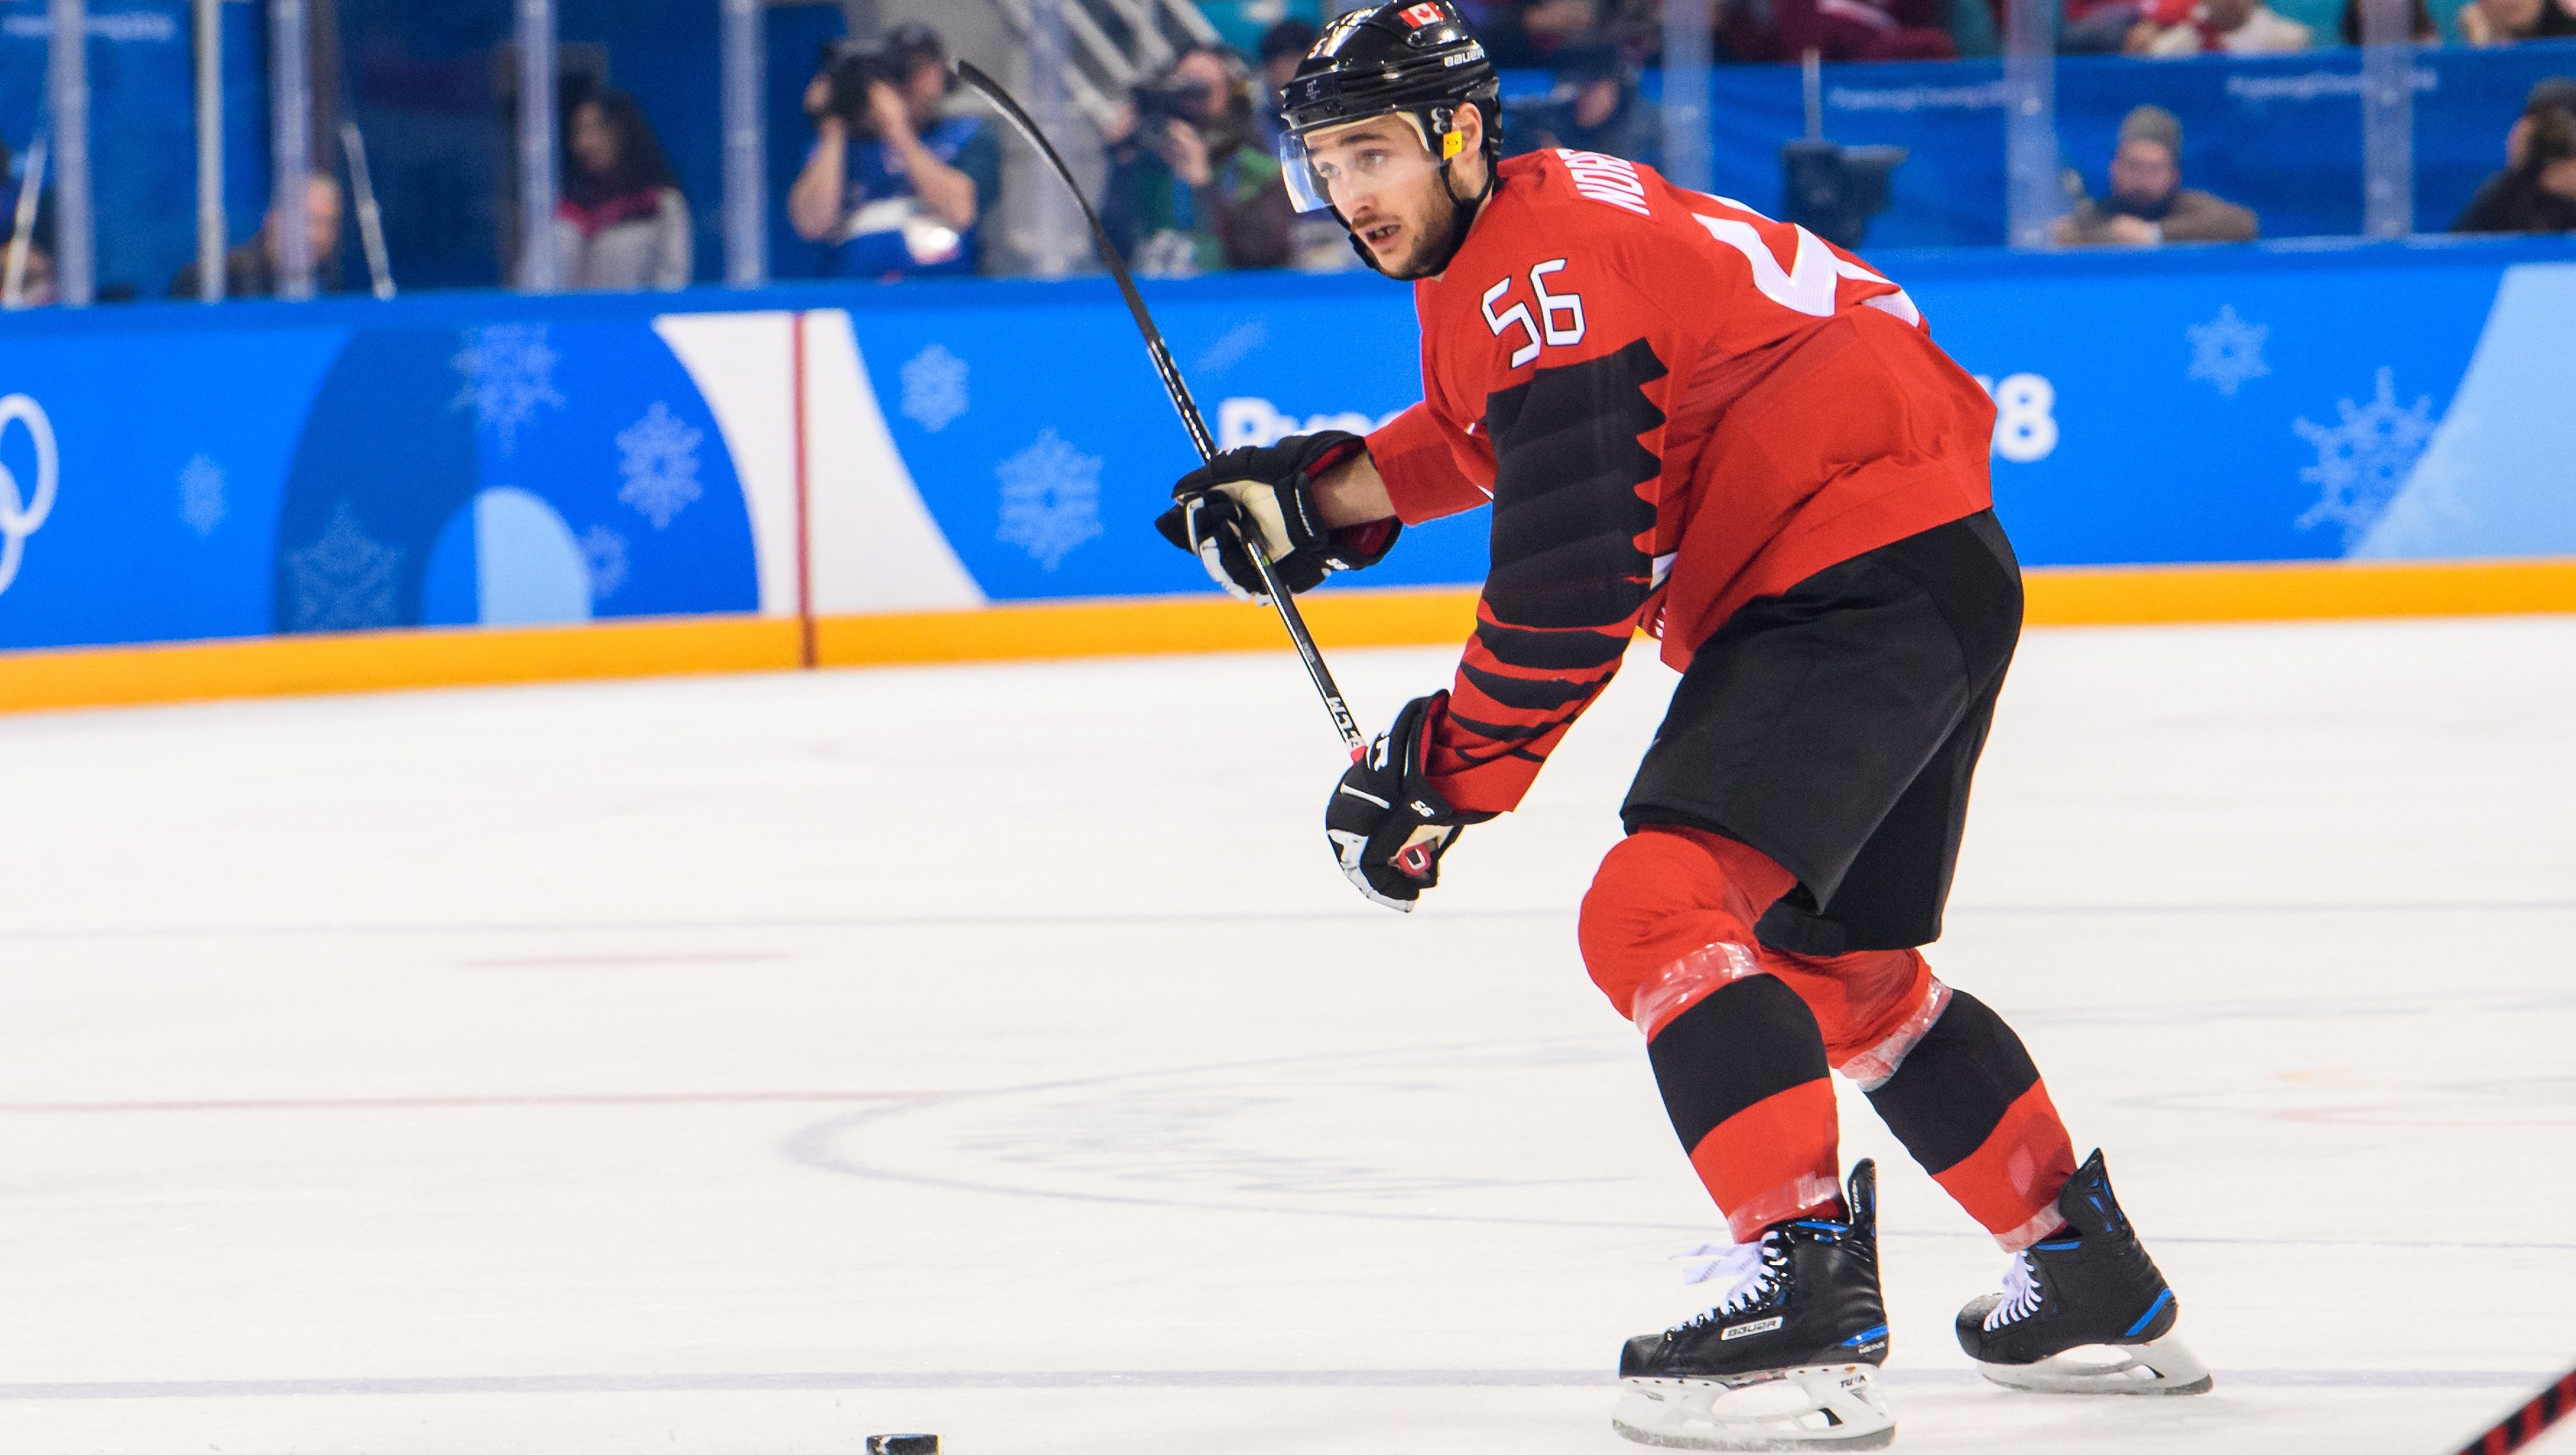 IIHF on X: The @Olympics jerseys were debuted at the Karjala Cup